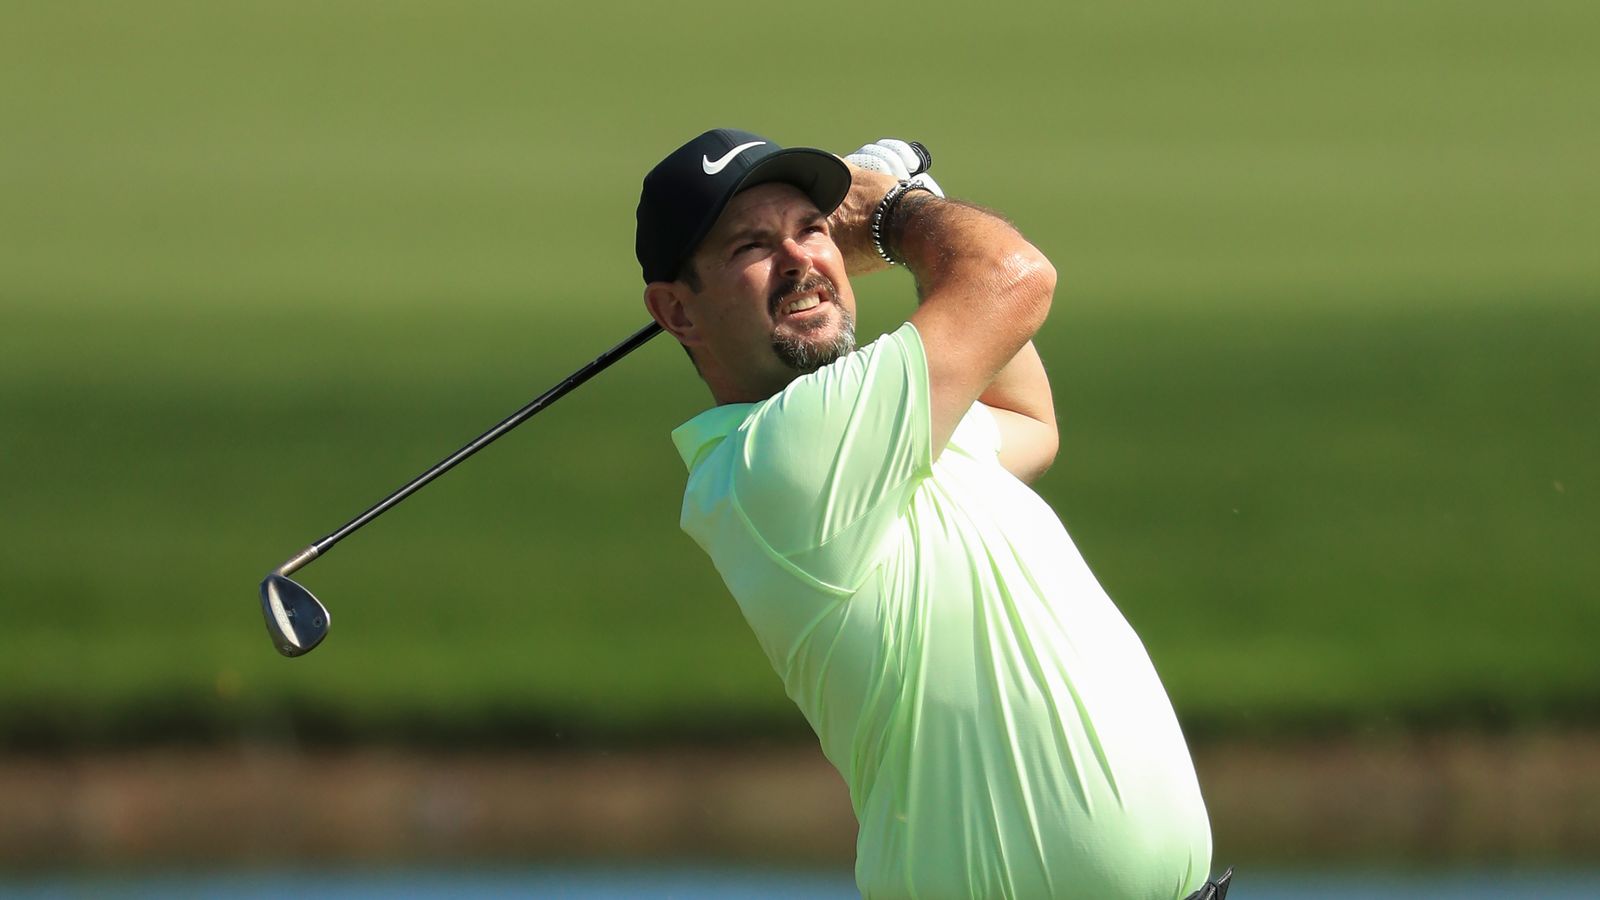 Rory Sabbatini fires 64 to claim two-shot lead at RBC Heritage | Golf ...